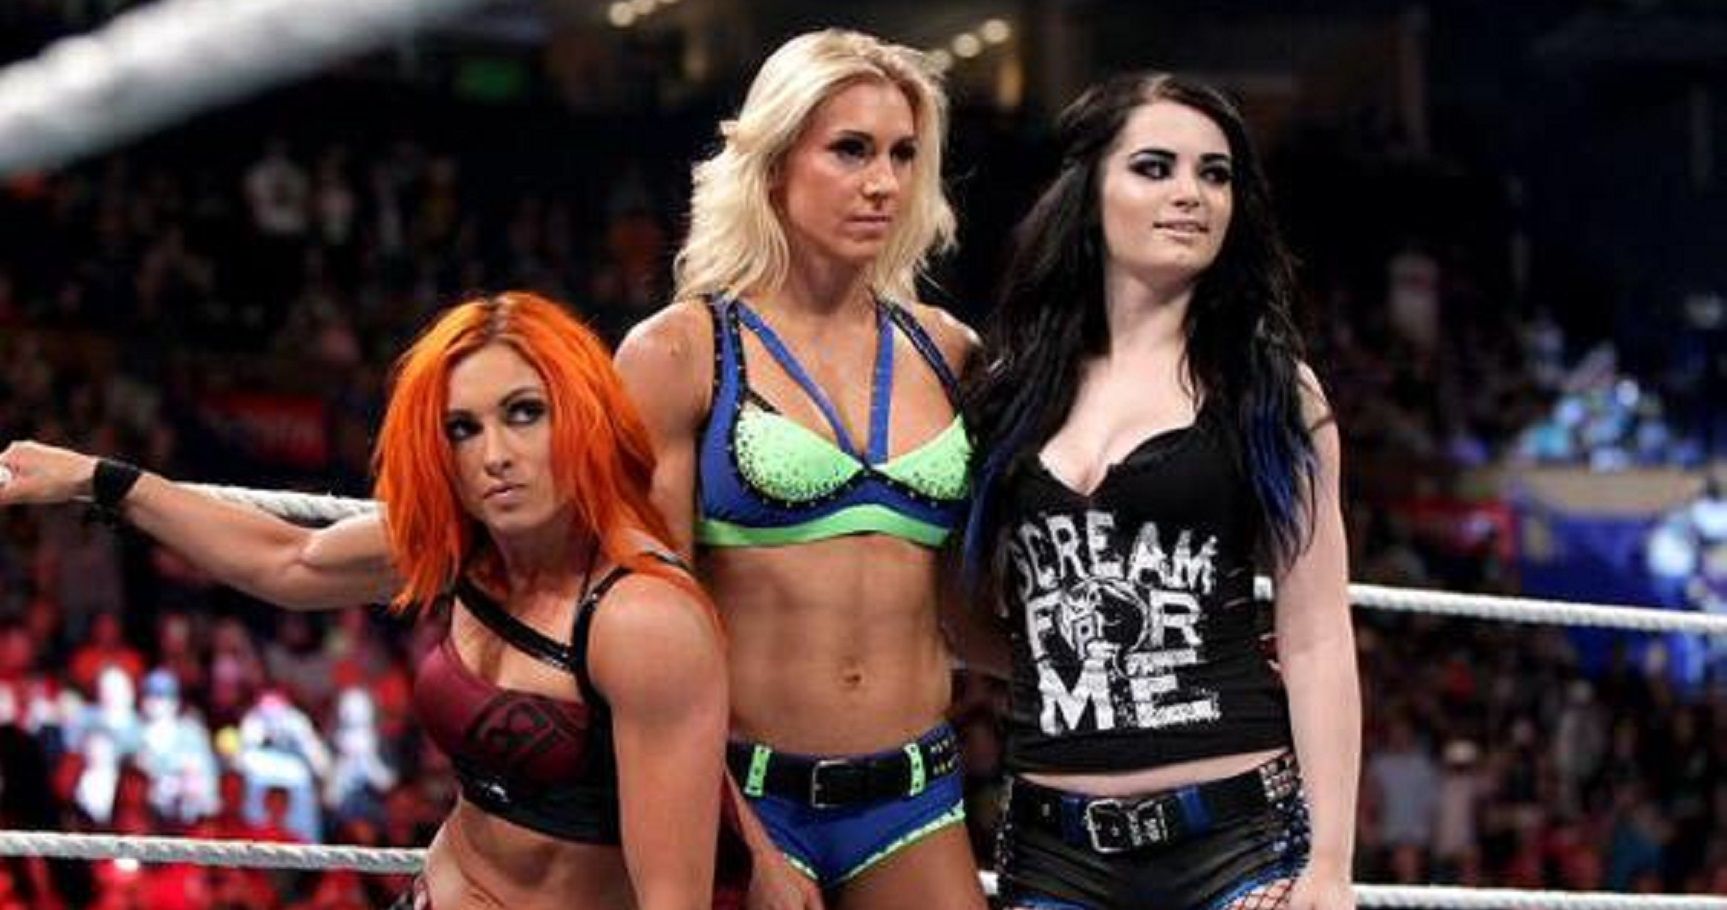 Top 15 Ways Wwe Messed Up The Divas Revolution Thesportster